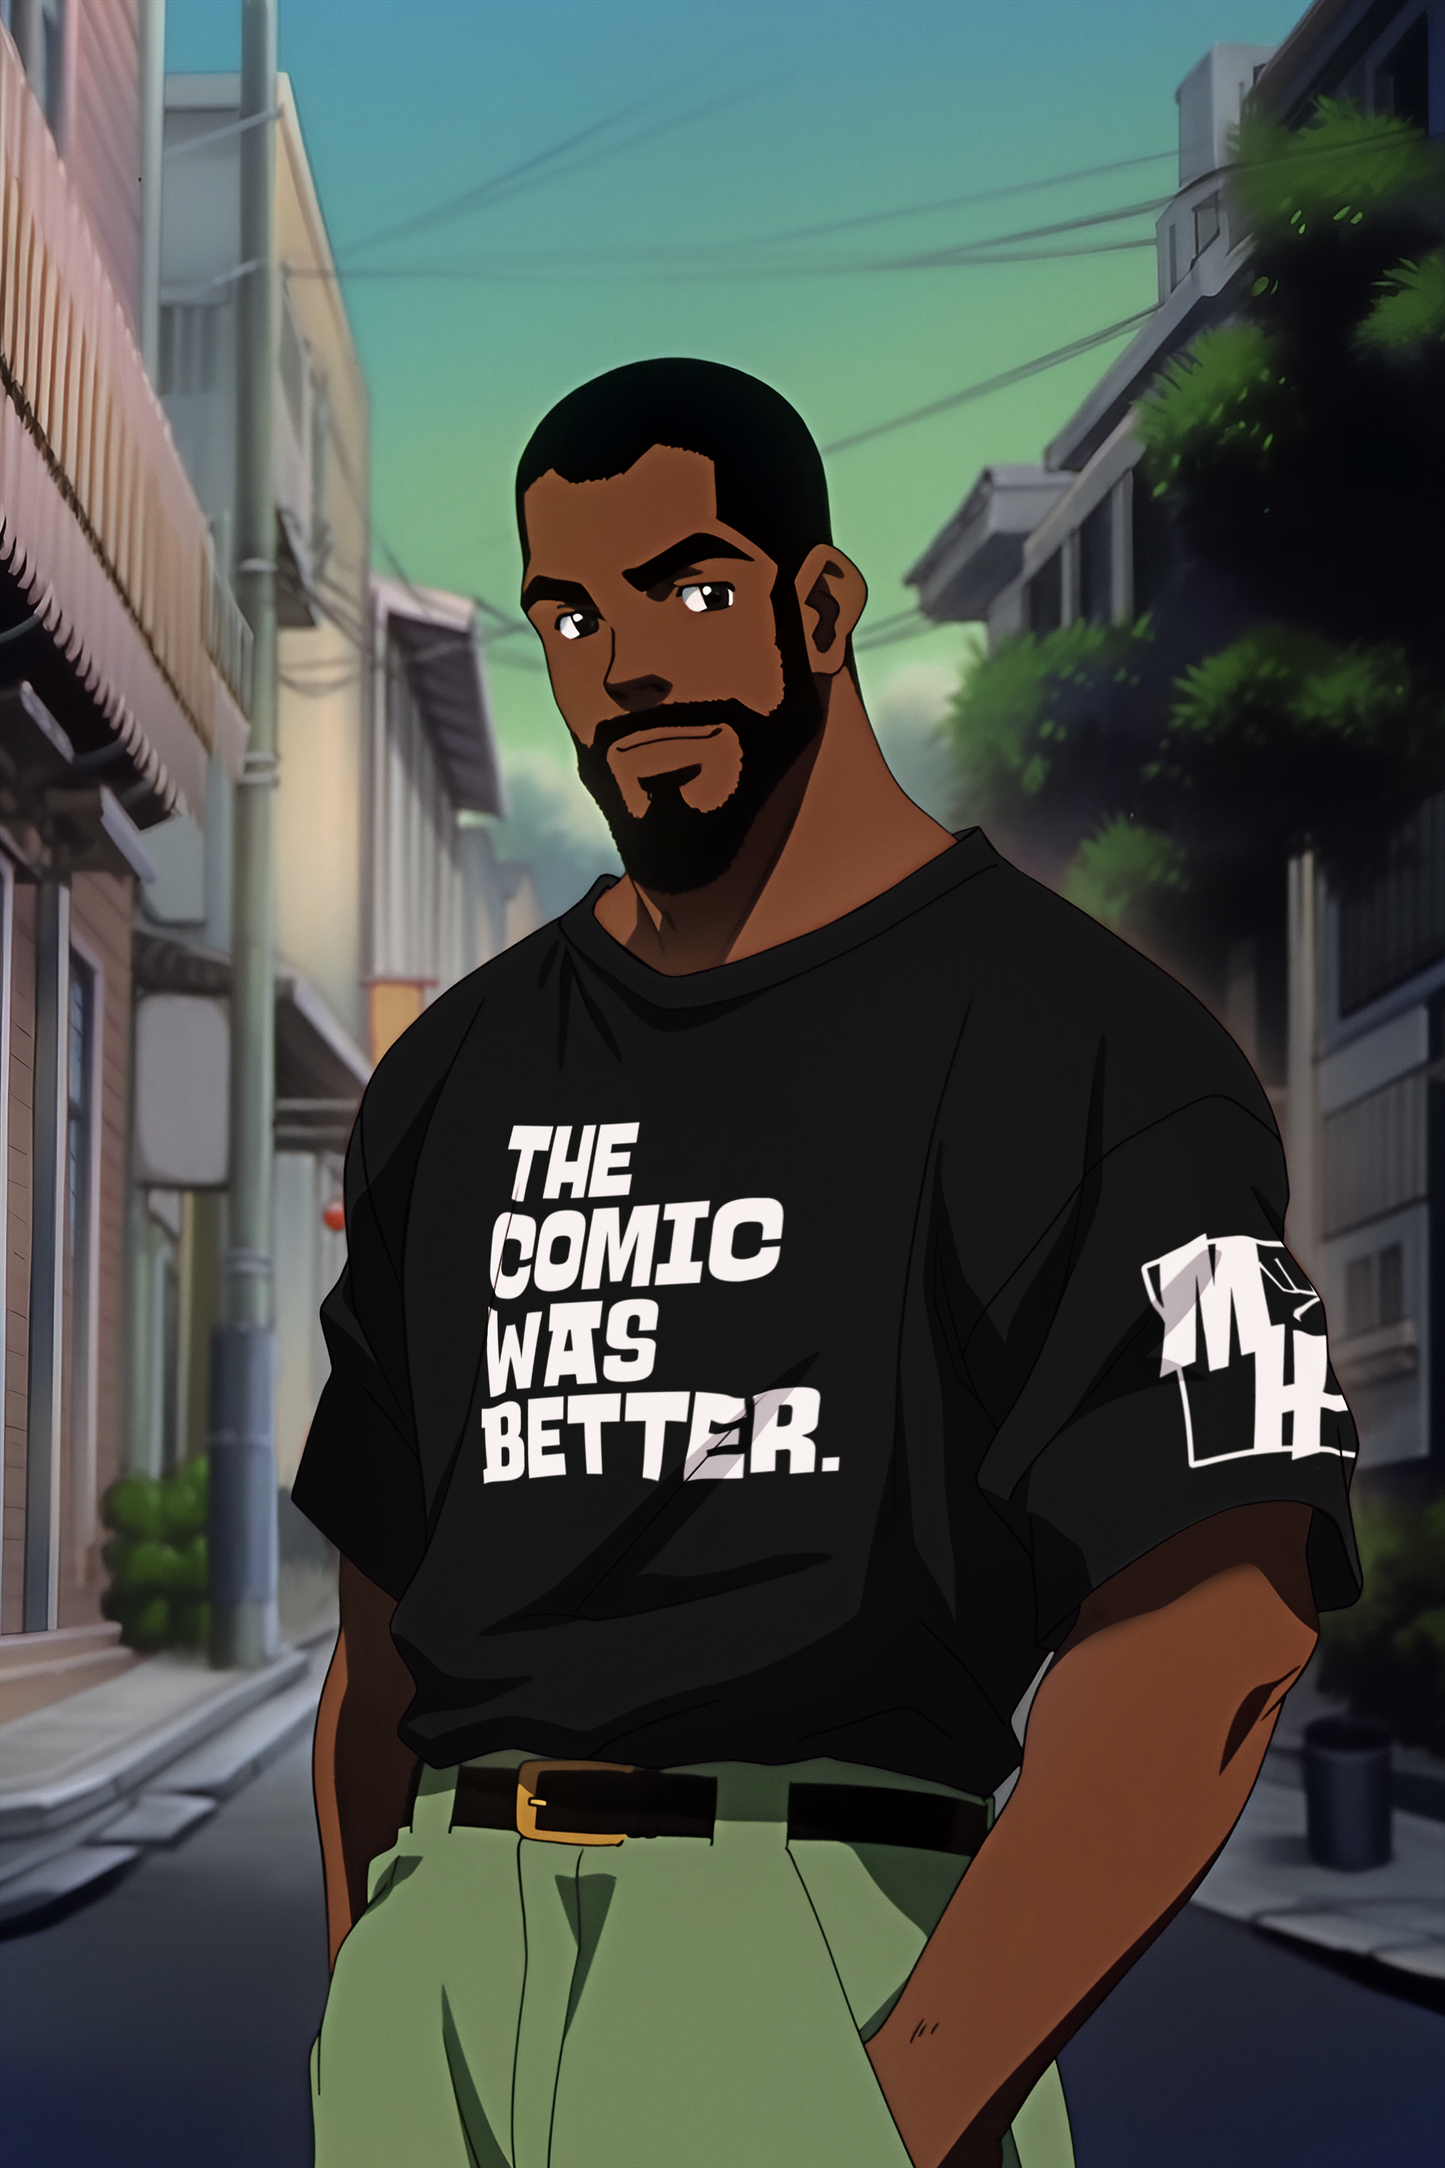 The Comic was Better T-Shirt